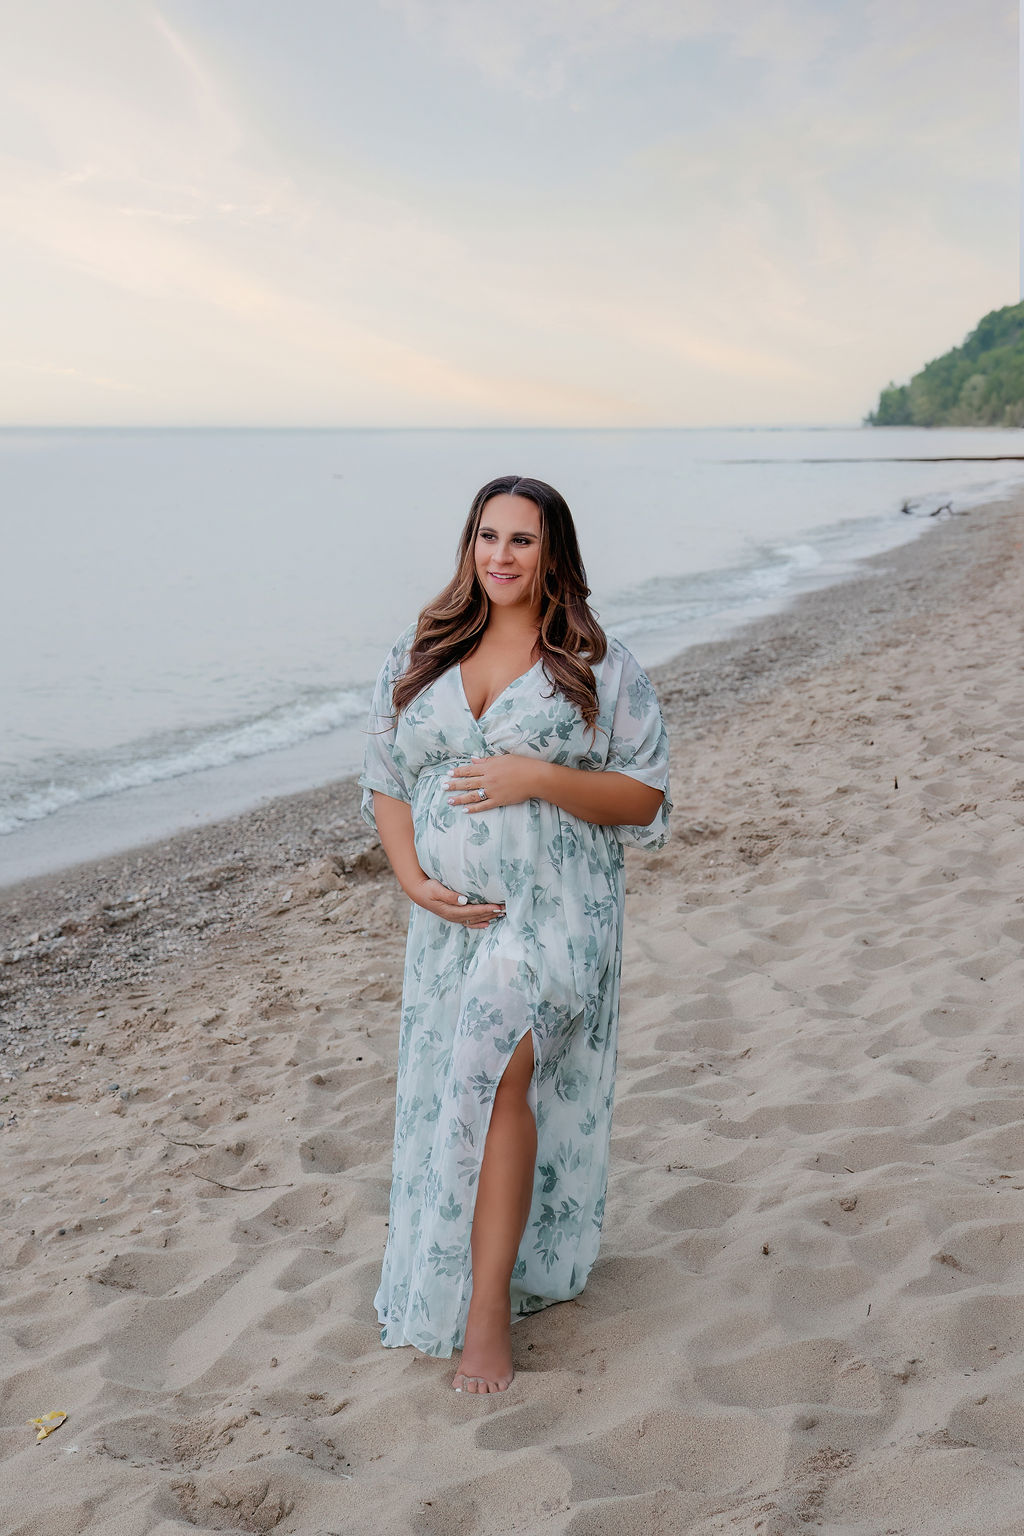 A mom to be walks down a beach at sunset in a blue floral print dress and holding her bump after visiting milwaukee baby shower venues